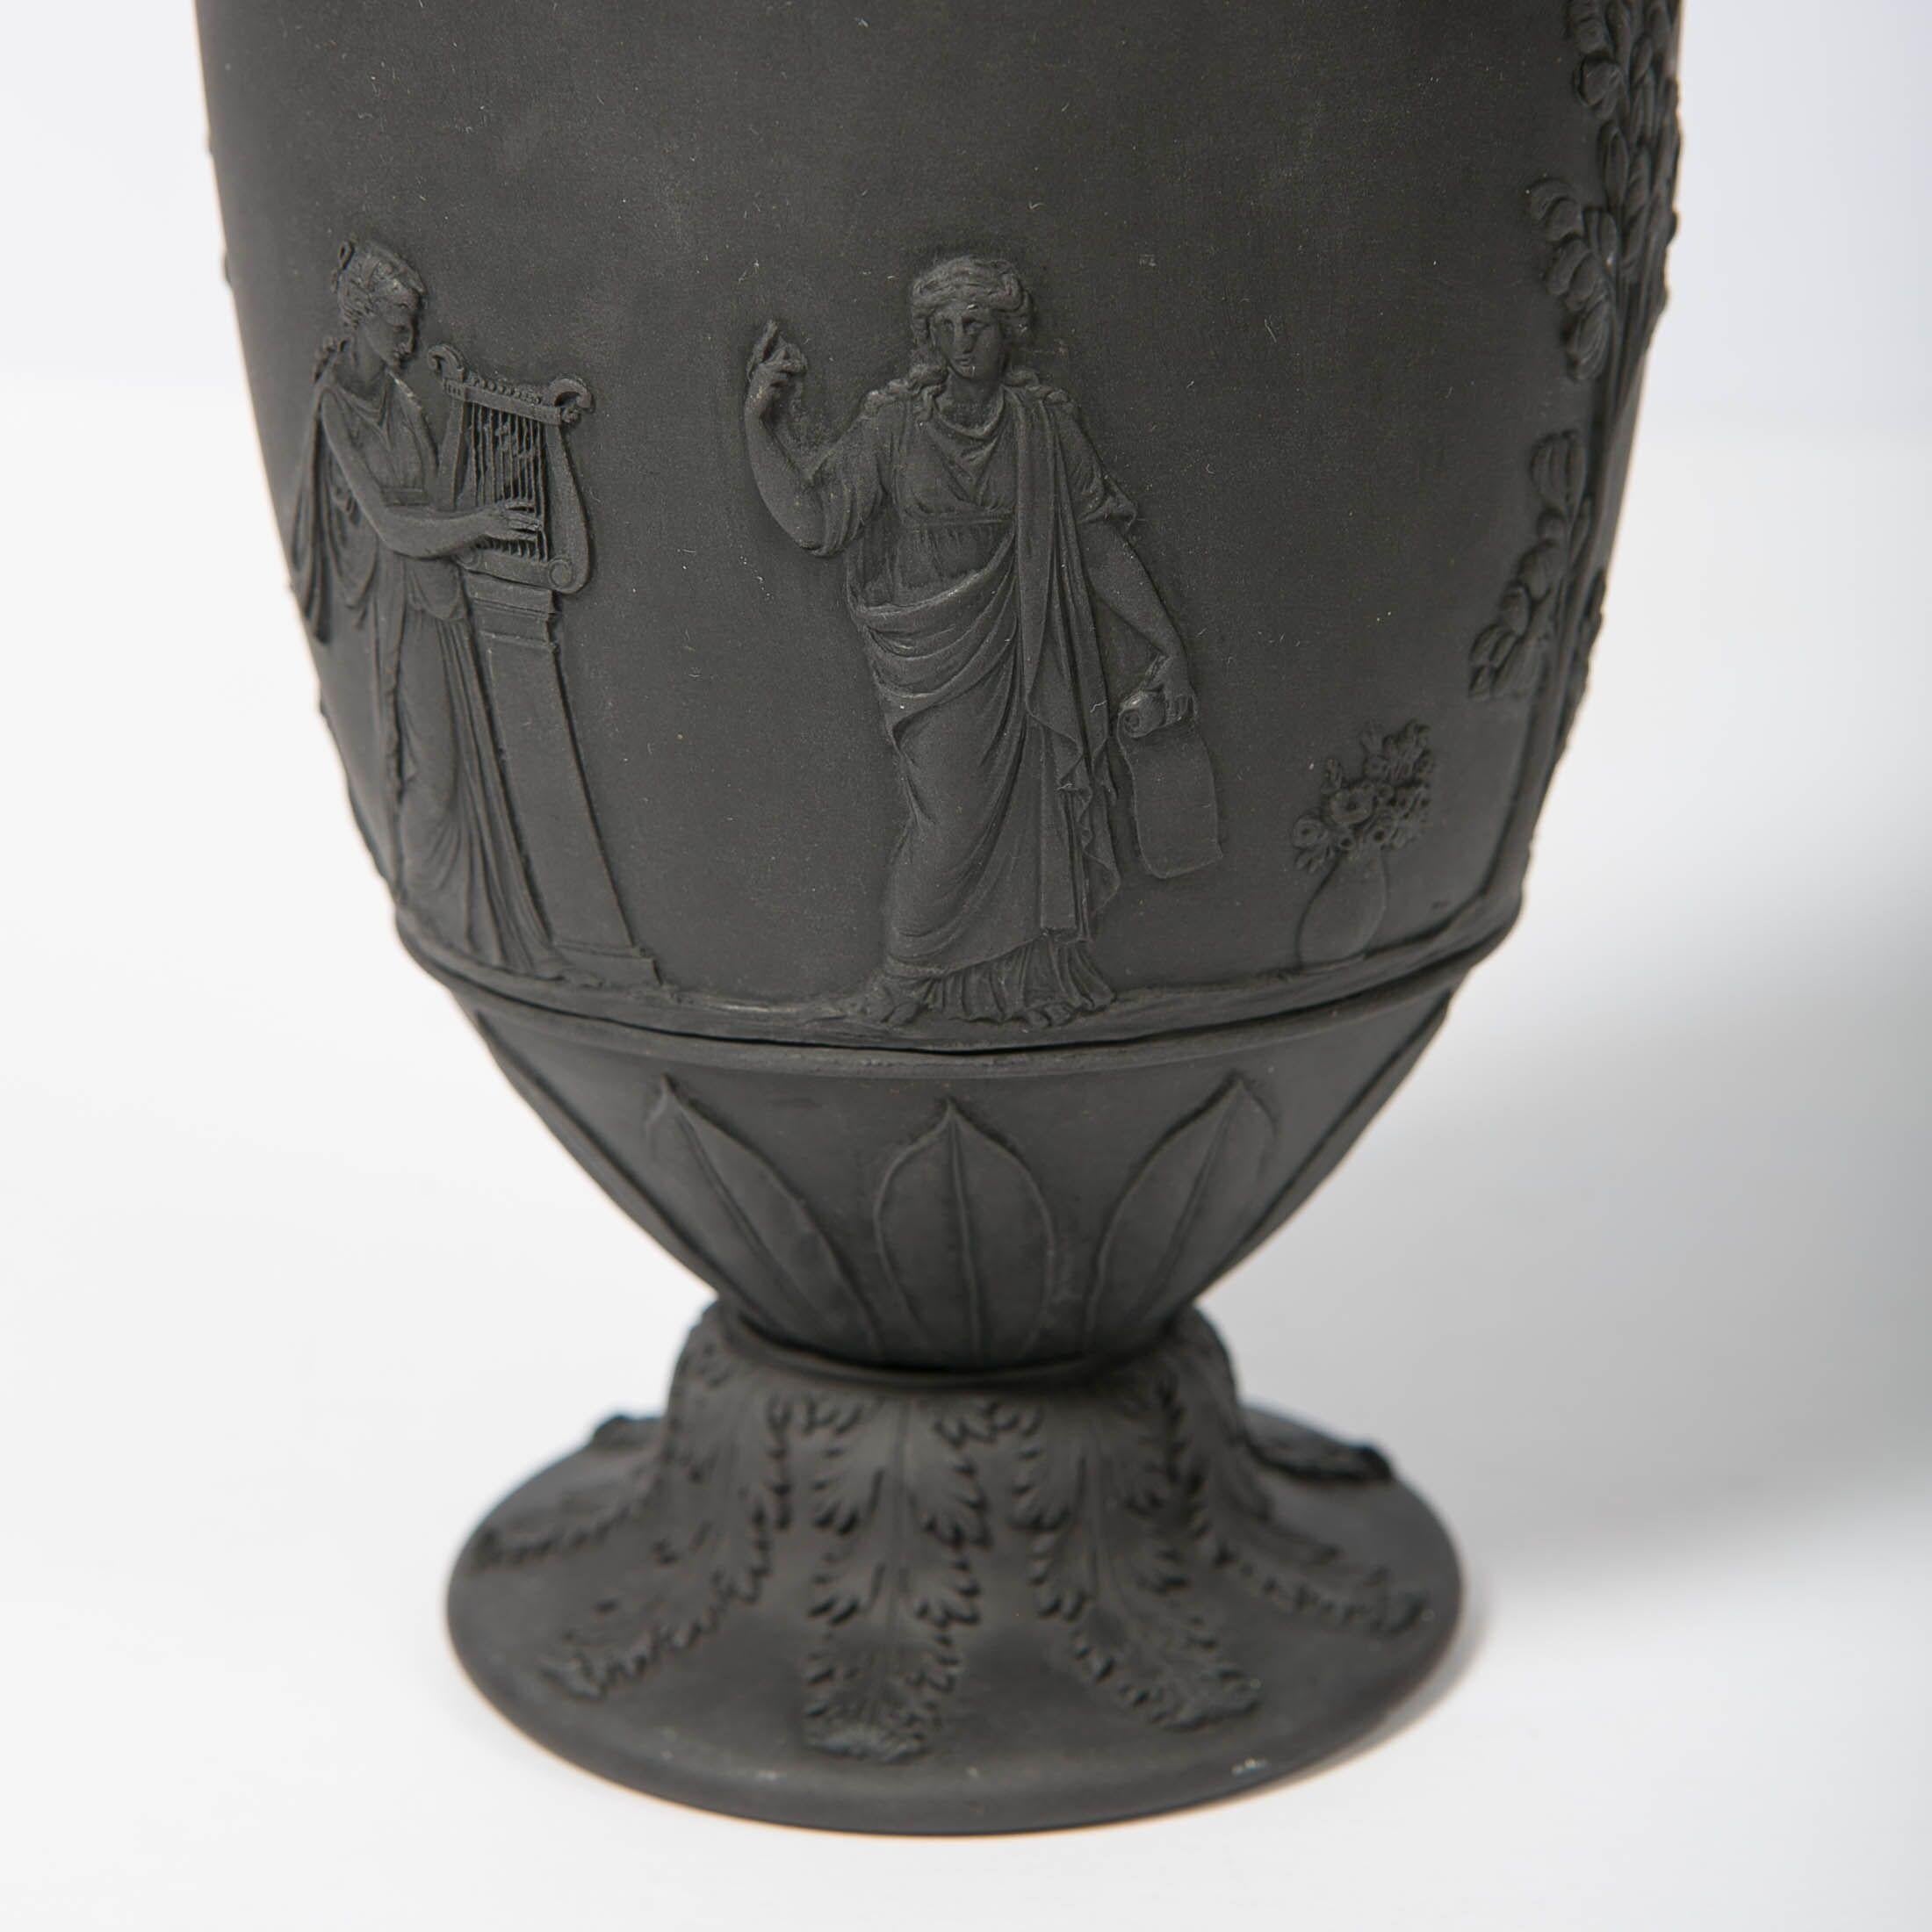 Neoclassical Wedgwood Black Basalt Vase with Classical Figures Made in England, circa 1840